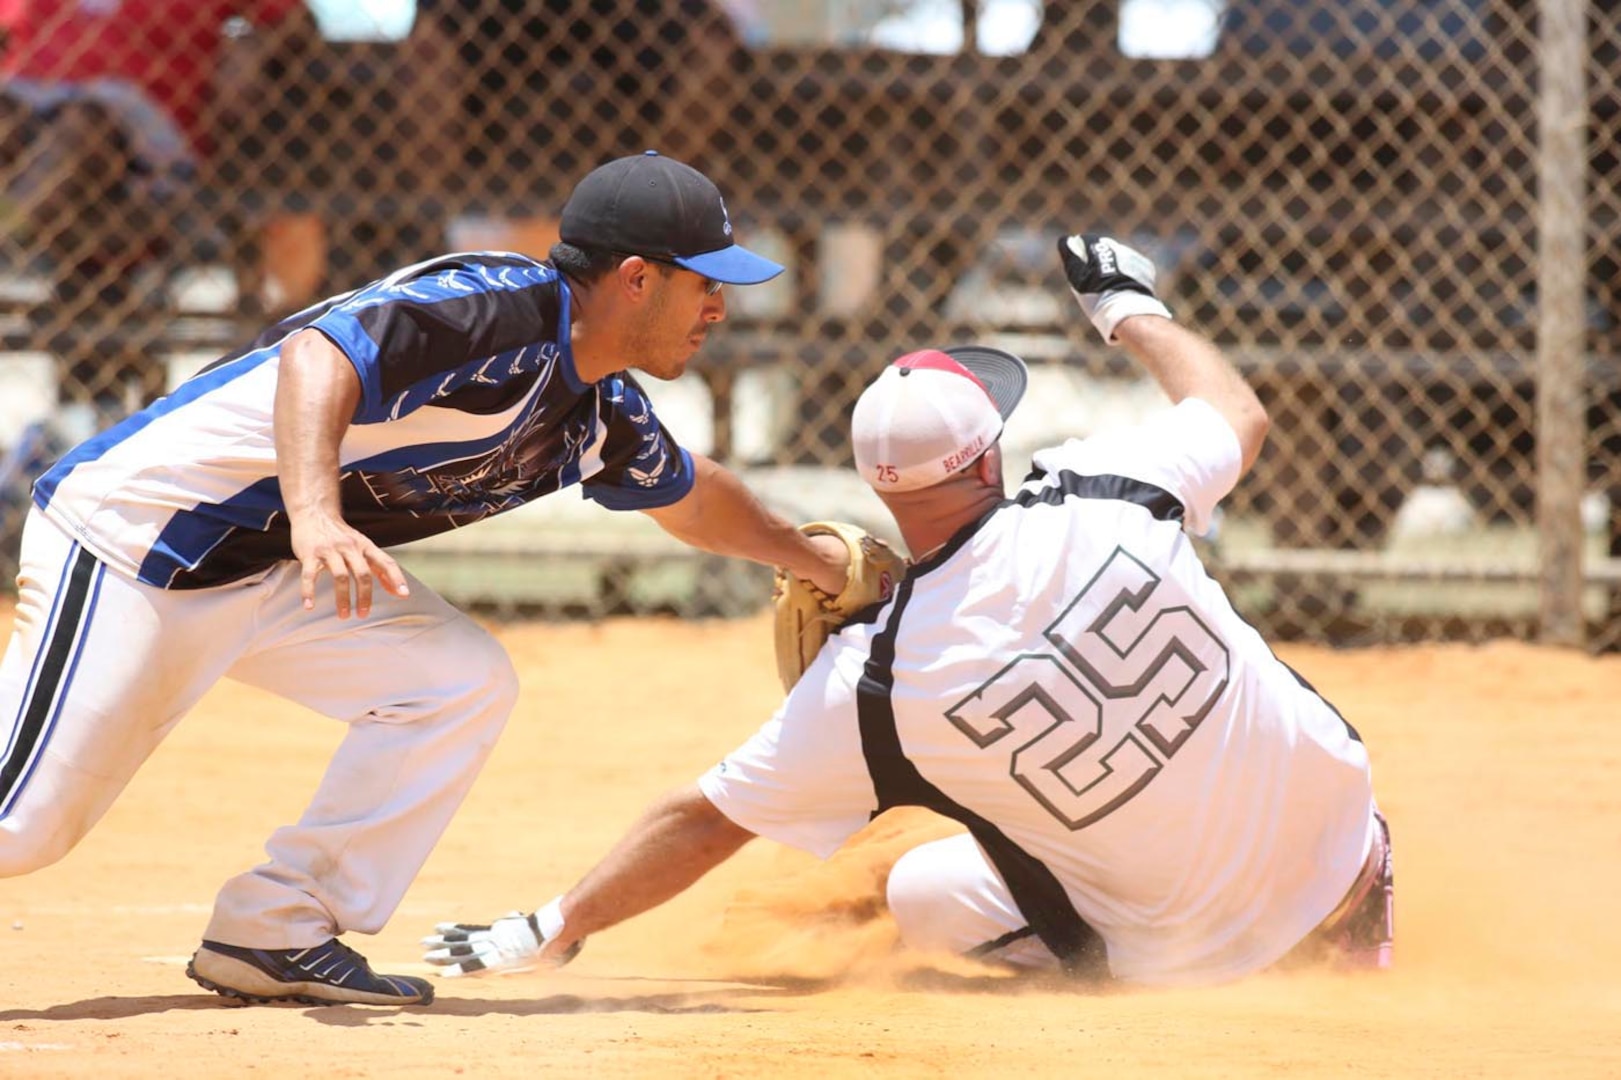 Warhawks catcher Daniel Ayon tags a Fort Bliss player out at home plate Sunday during a loser’s bracket game against Fort Bliss. The Warhawks defeated Fort Bliss 19-13, and went on to win the Commander’s Cup tournament title. (U.S. Air Force photo/Robbin Cresswell)